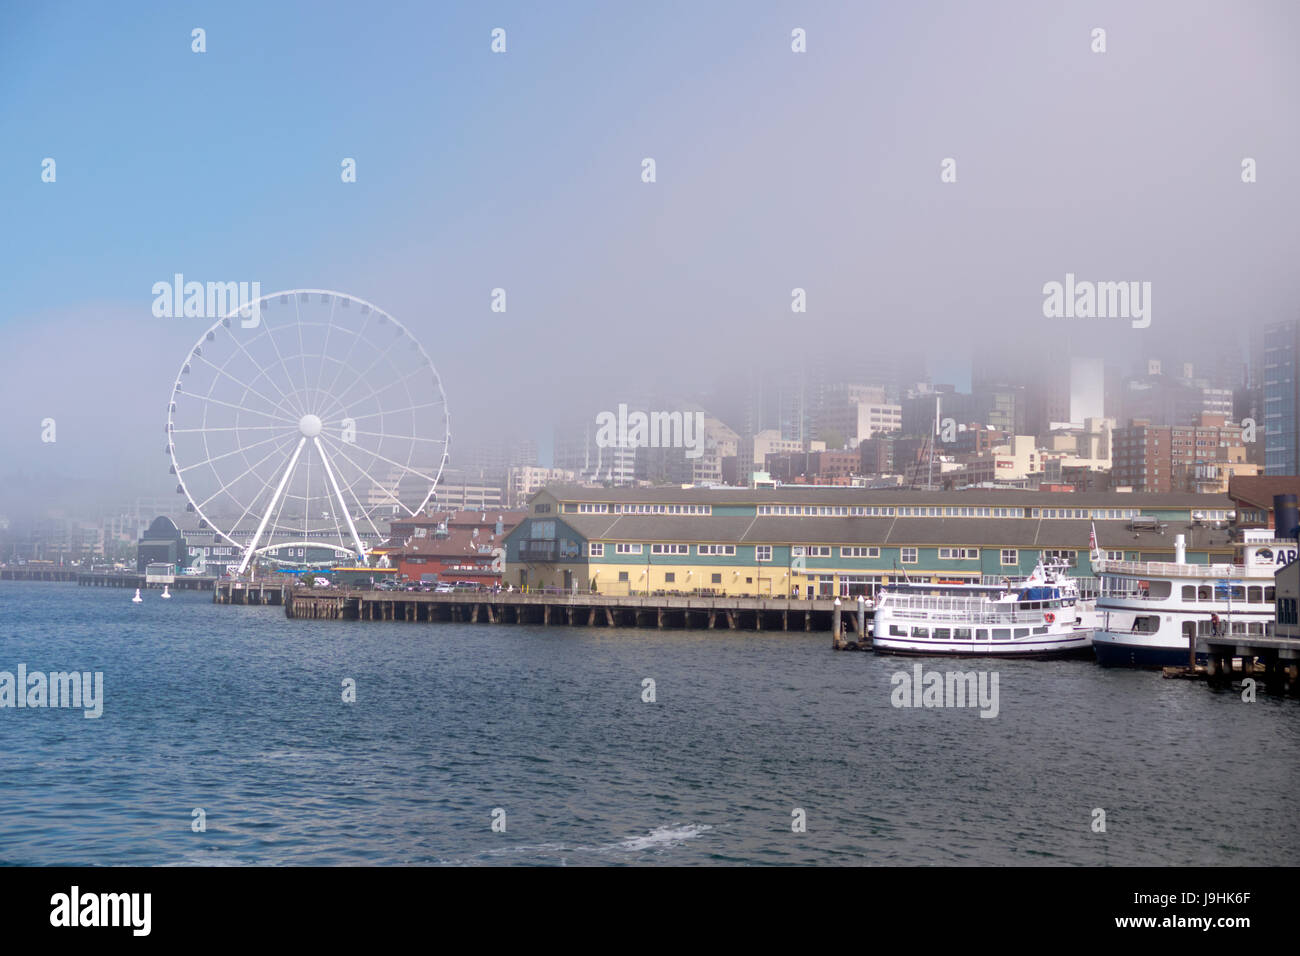 The wharf at Seattle as seen from the upper deck of a car ferry. Stock Photo